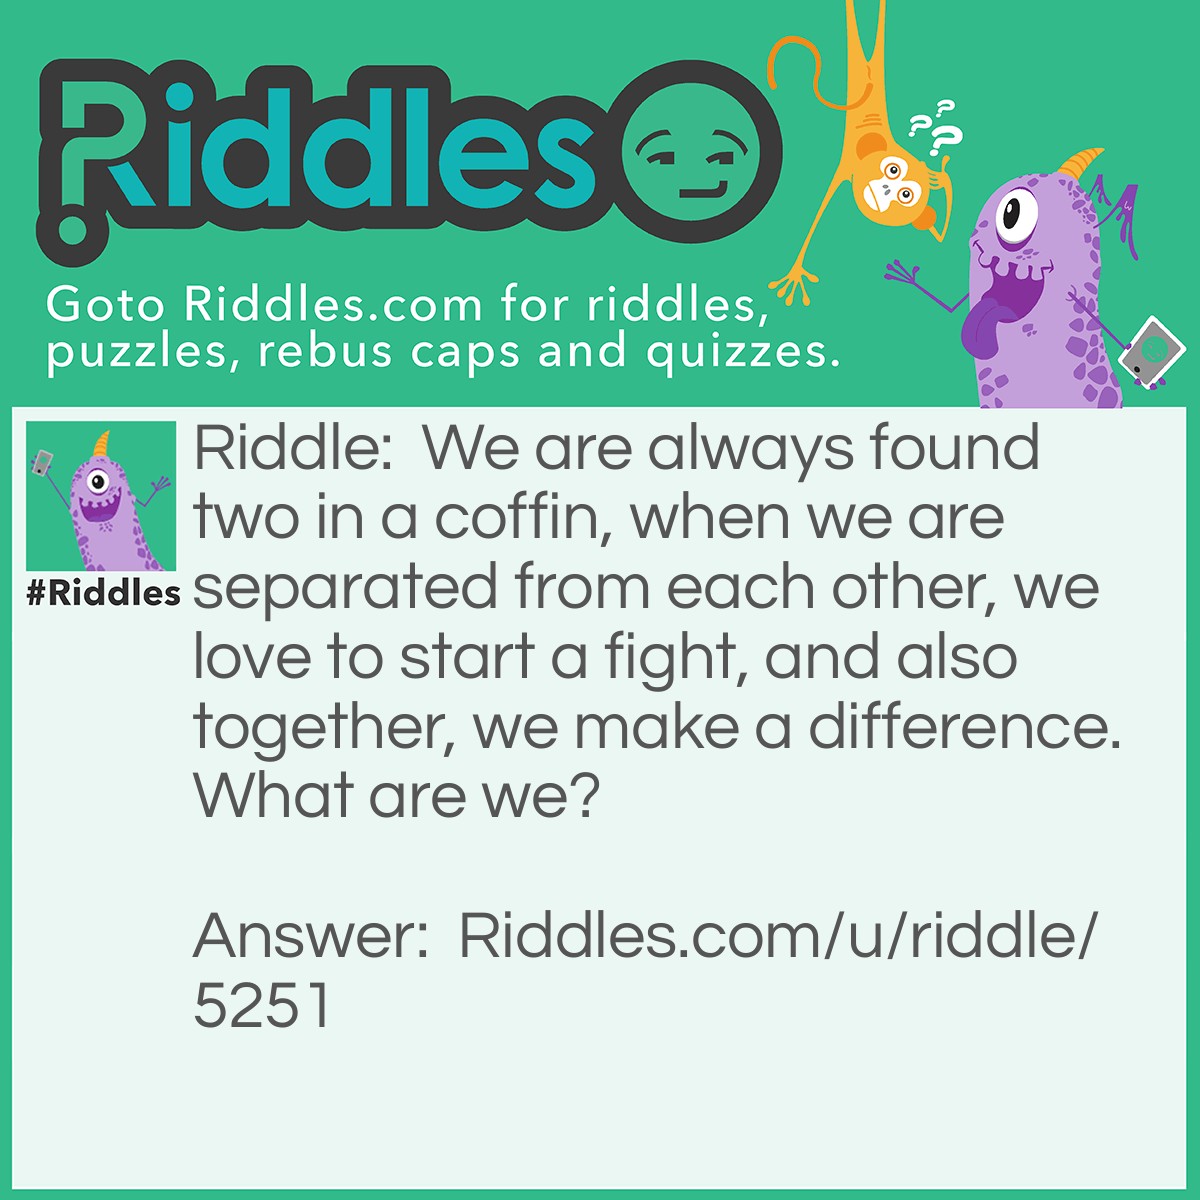 Riddle: We are always found two in a coffin, when we are separated from each other, we love to start a fight, and also together, we make a difference. What are we? Answer: The letter "F".